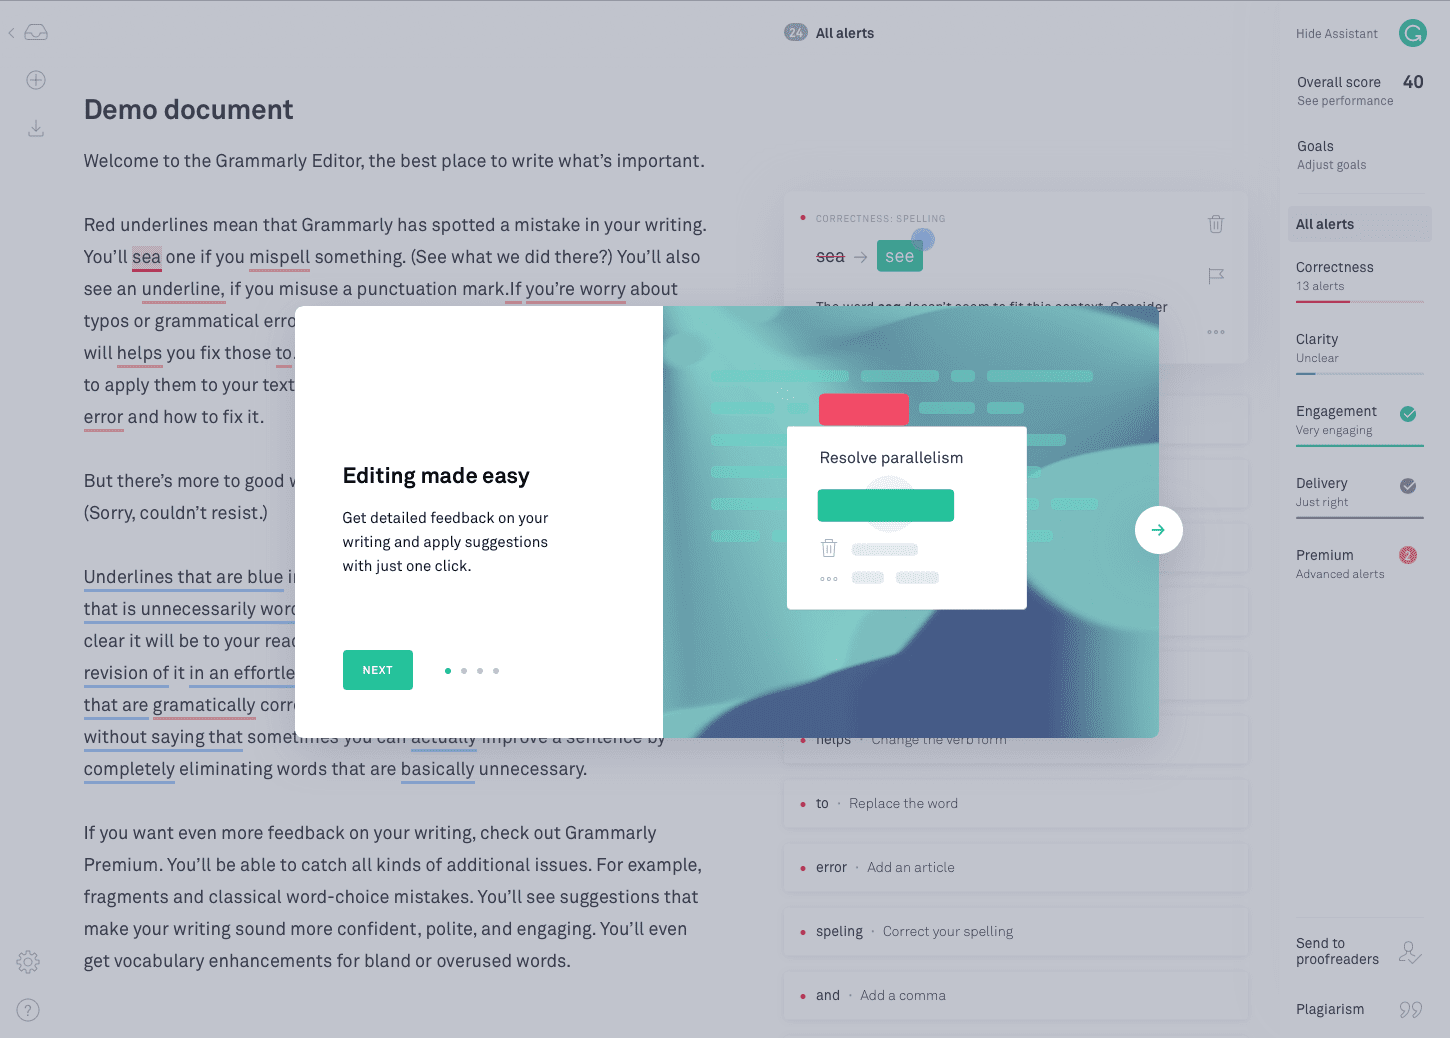 The intuitive onboarding experience of Grammarly is great for learnability